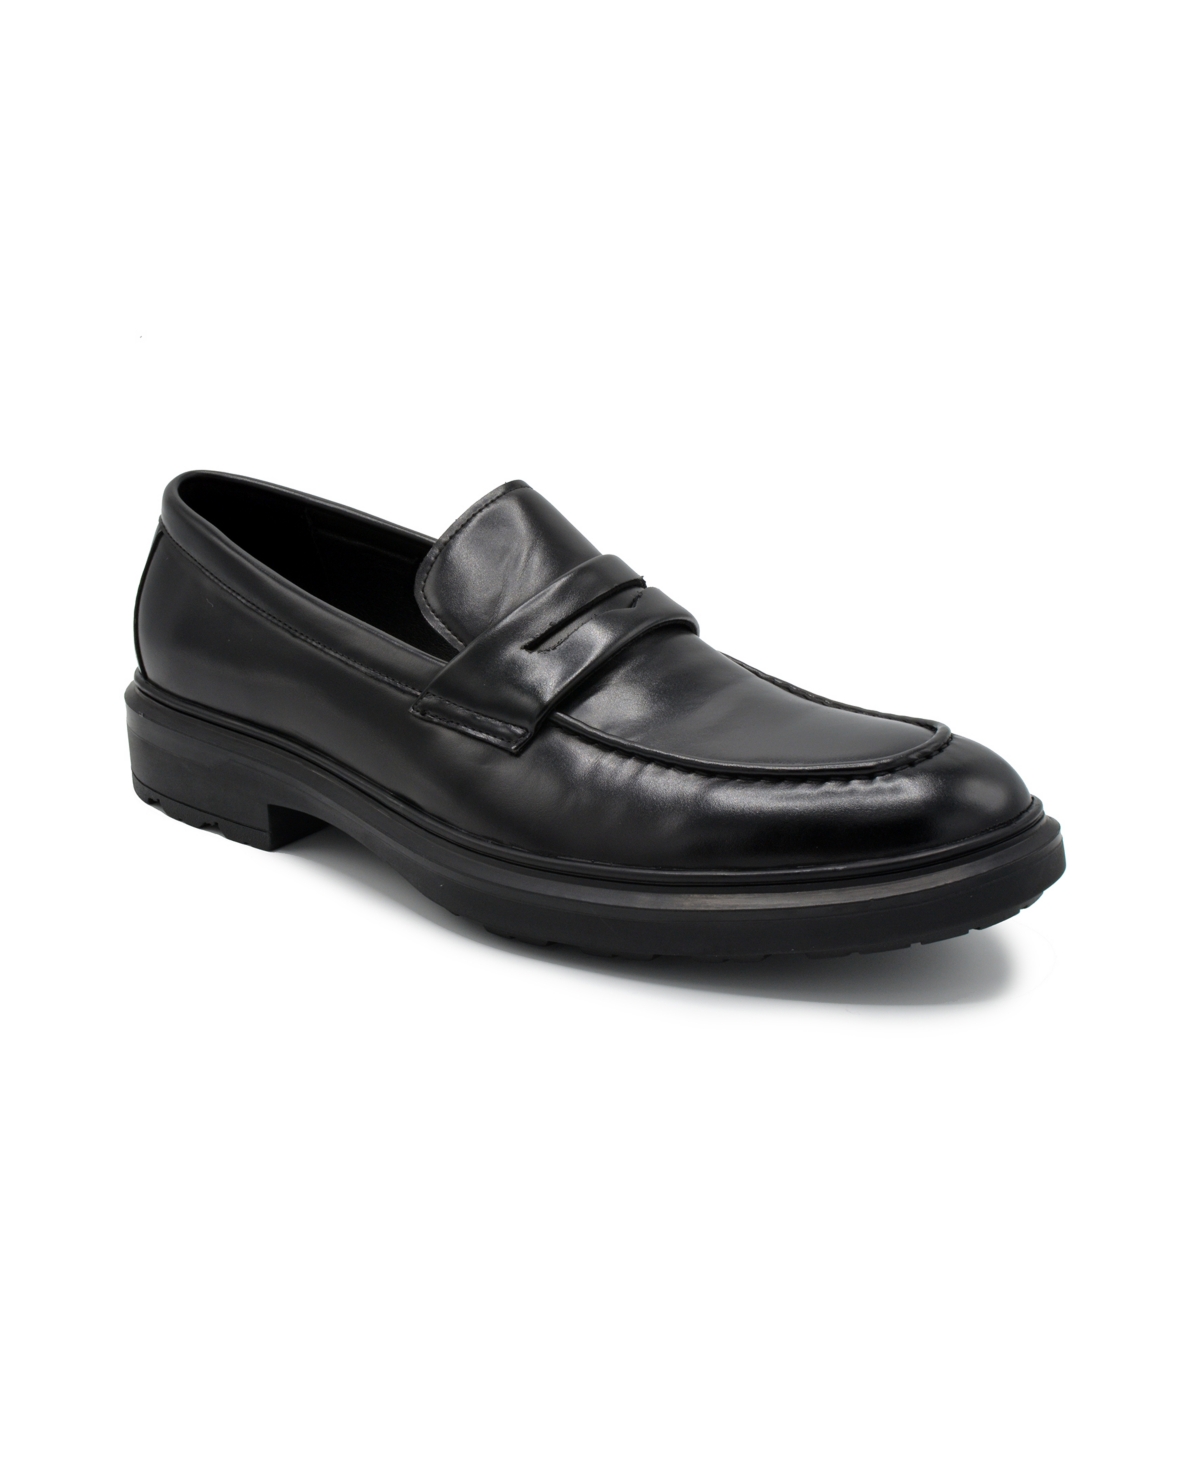 ASTON MARC MEN'S TUSCAN PENNY LOAFER DRESS SHOES